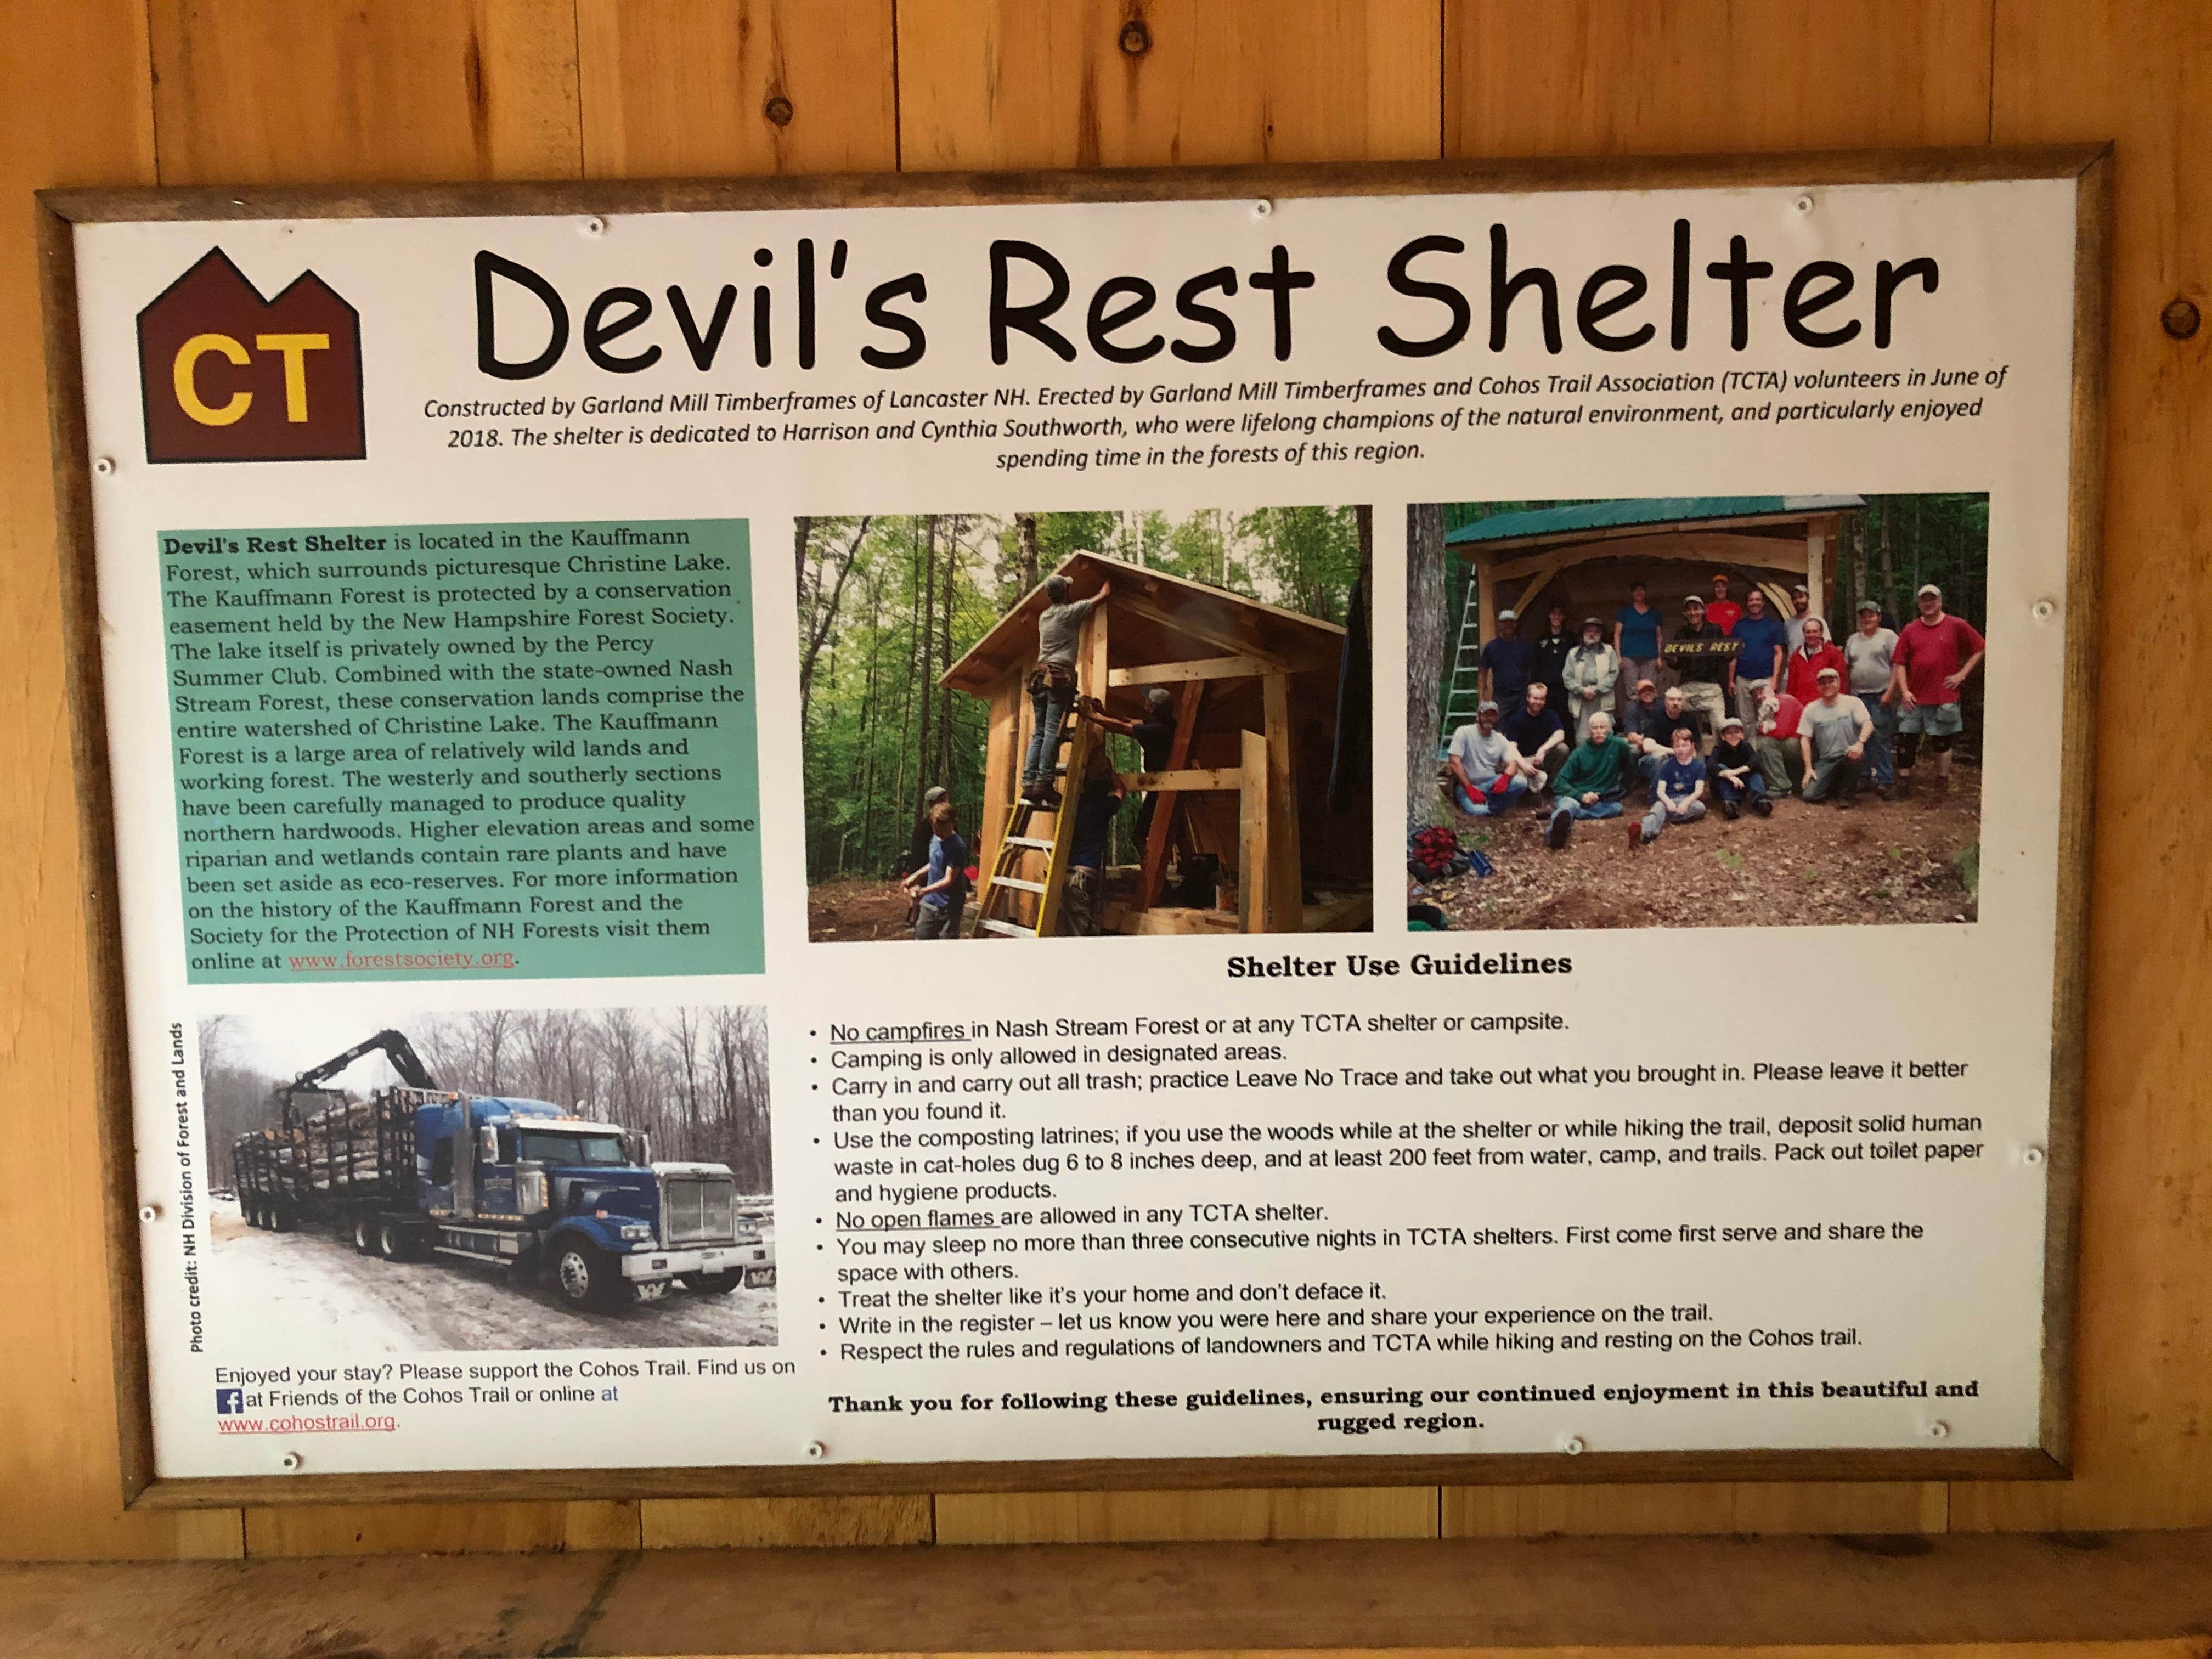 Camper submitted image from Devil’s Rest Shelter - 1